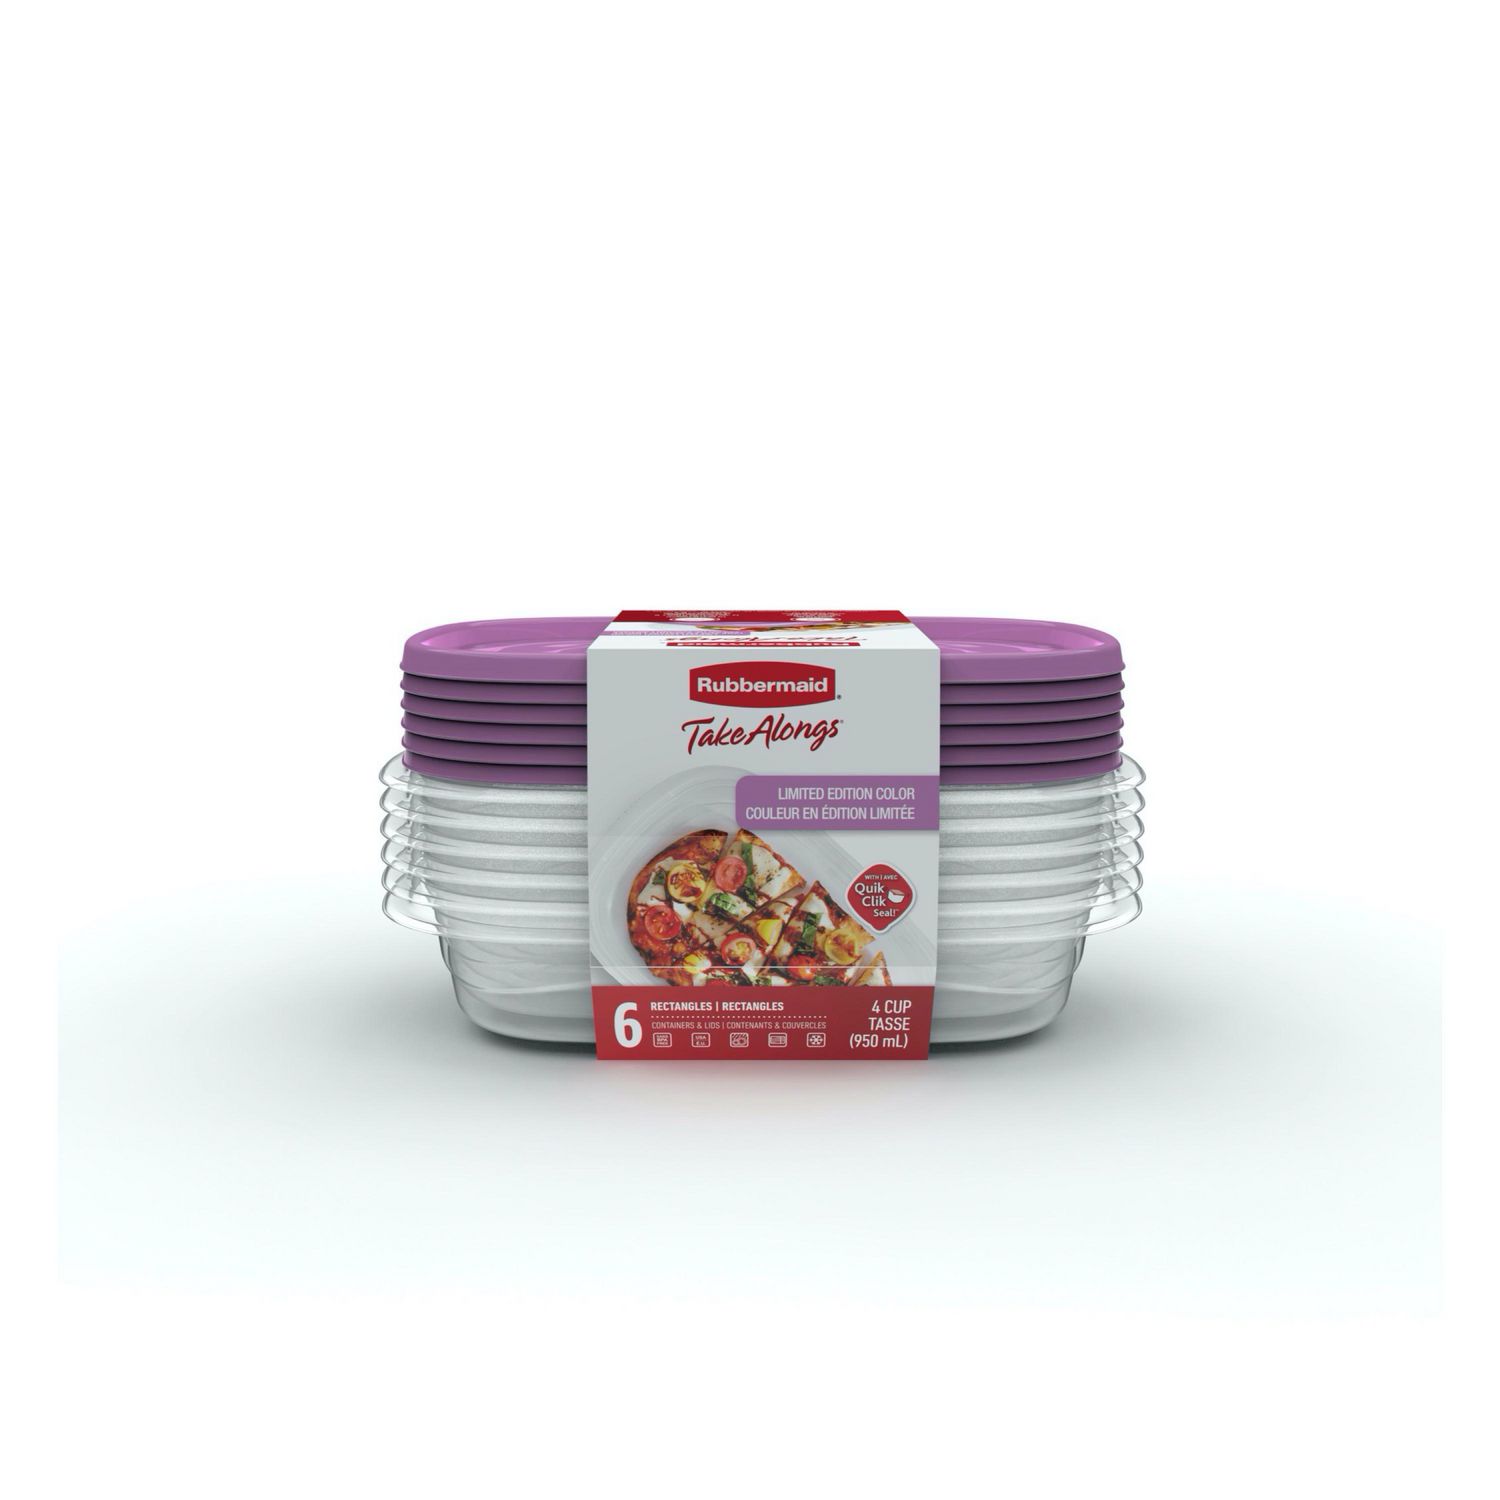 Rubbermaid TakeAlongs 950-mL (4-Cup) Rectangular Food Storage Containers,  Special-Edition Orchid Purple, 6-Pack 